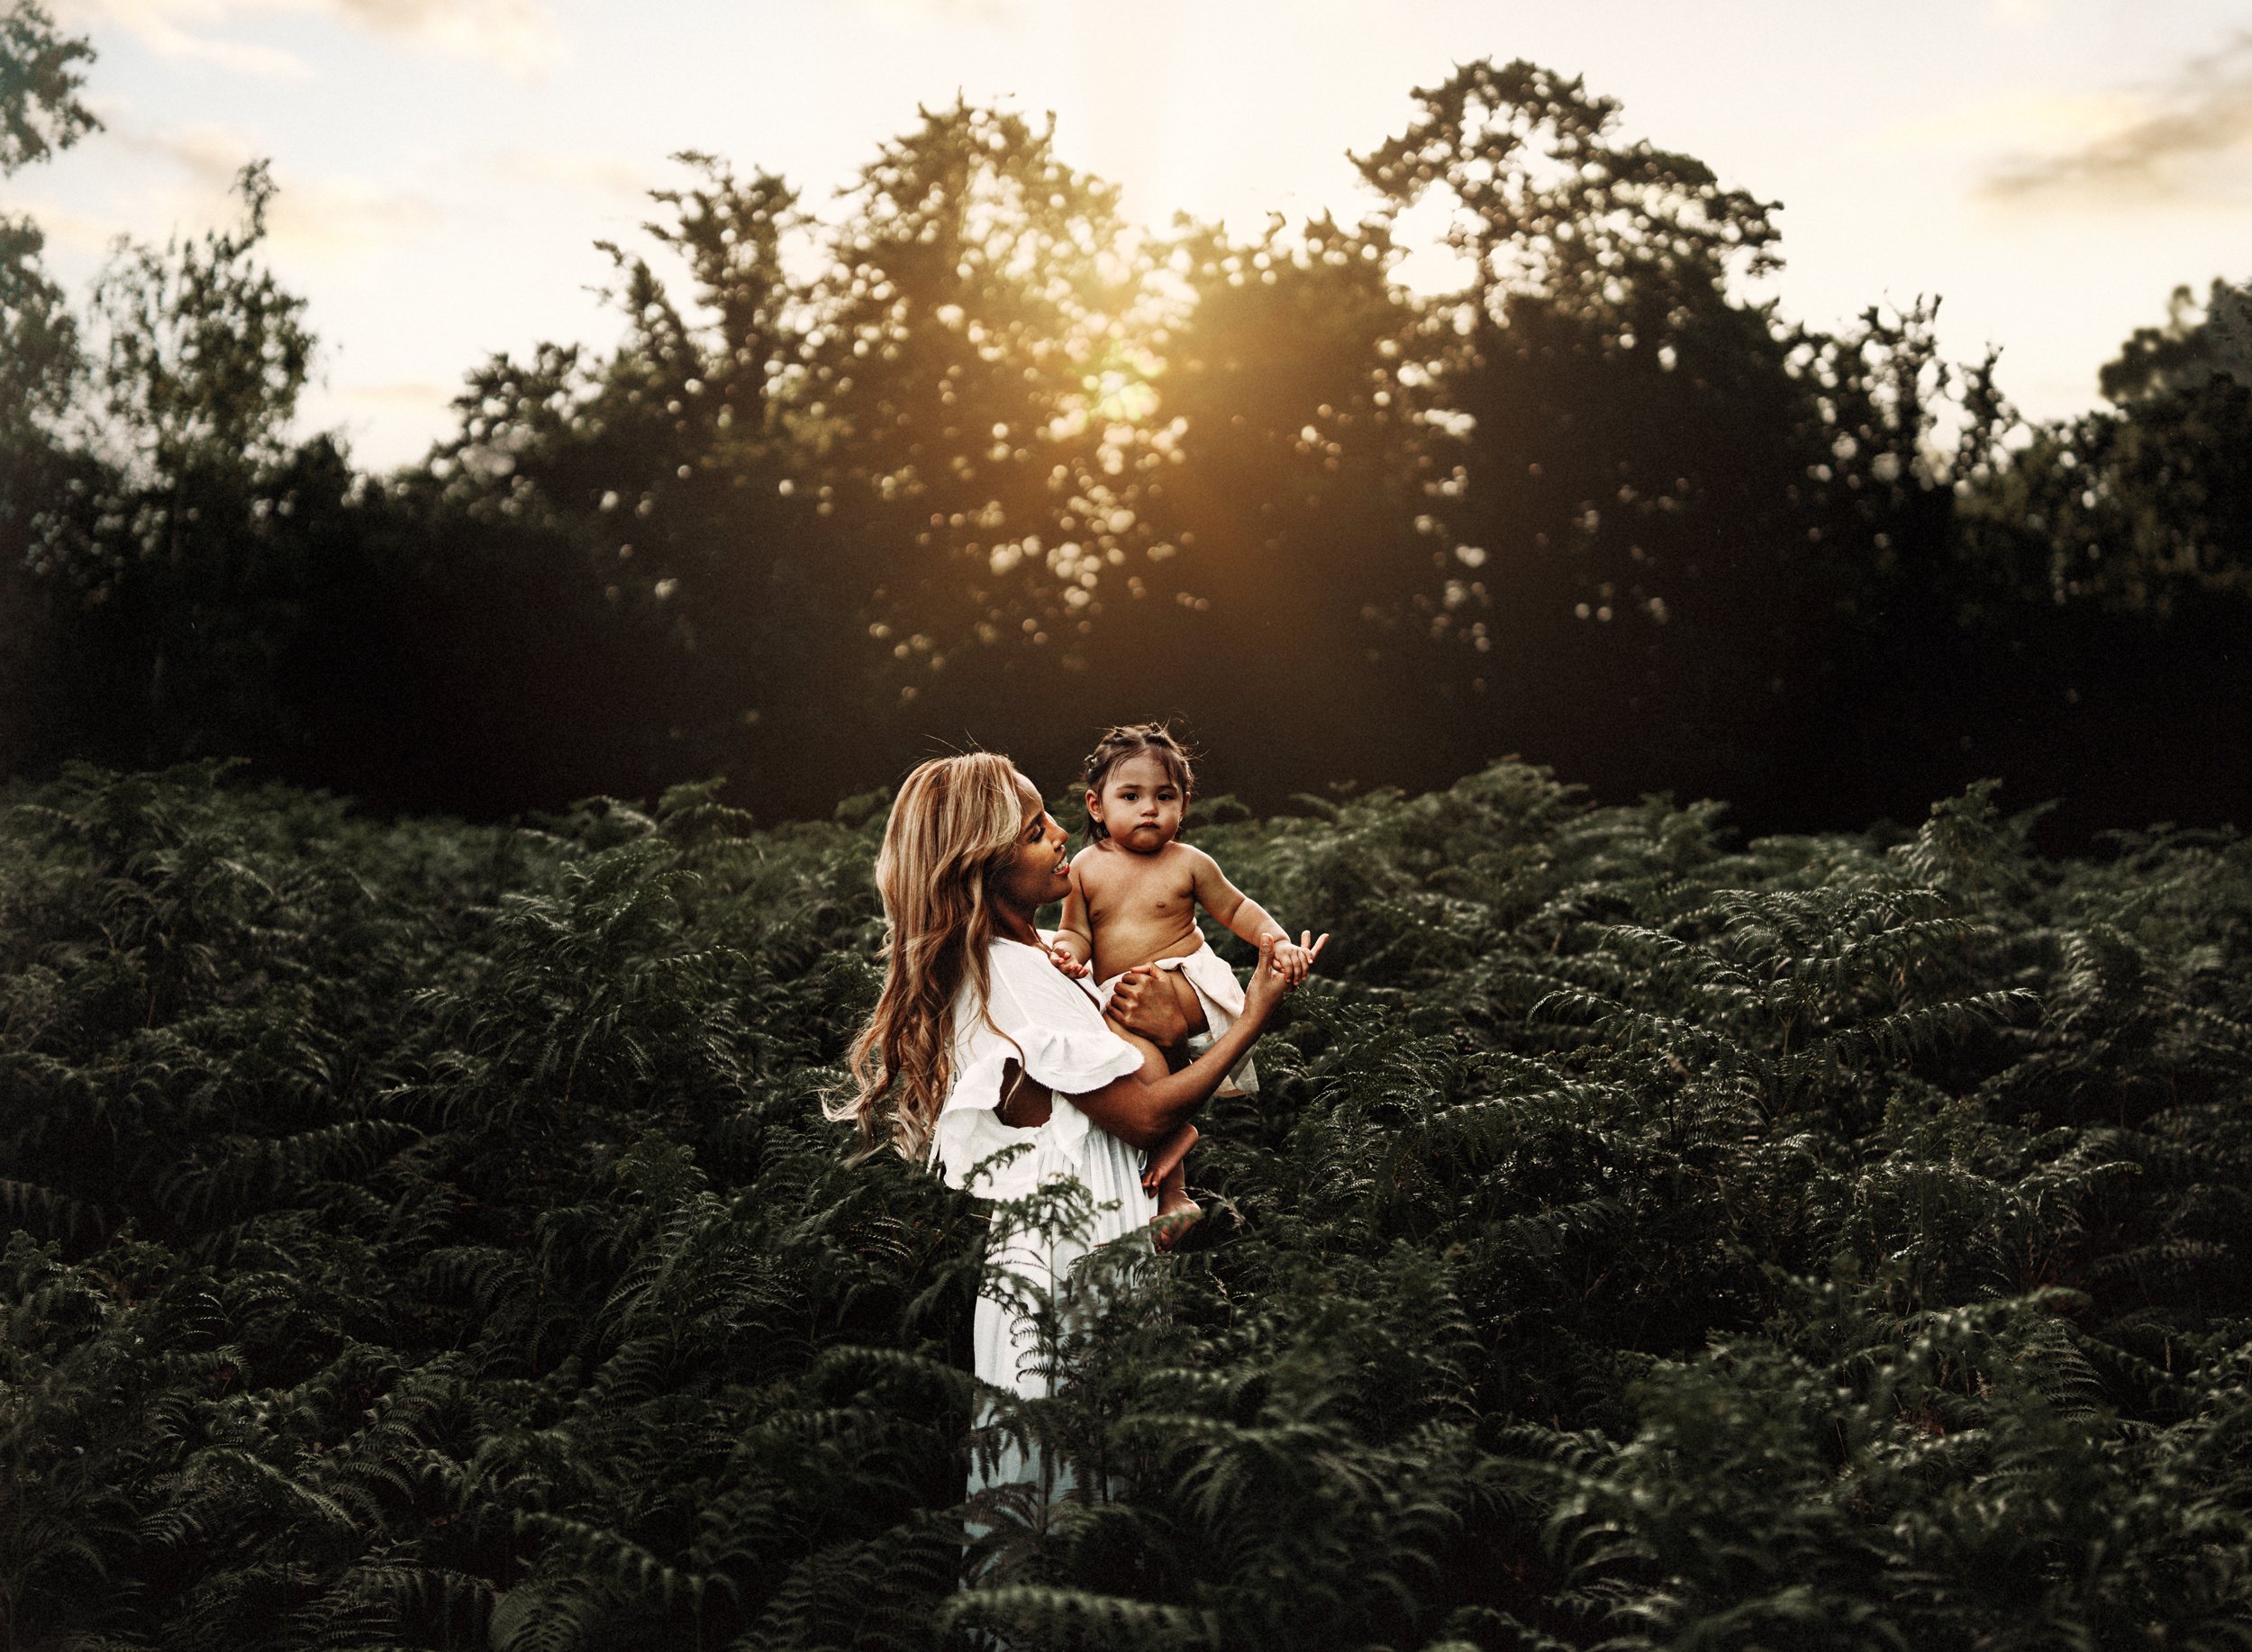 Young-mother-with-baby-girl-intimate-standing-in-fern-fields-at-sunset-in-landstuhl-germany-by-family-photographer-sarah-havens.jpg